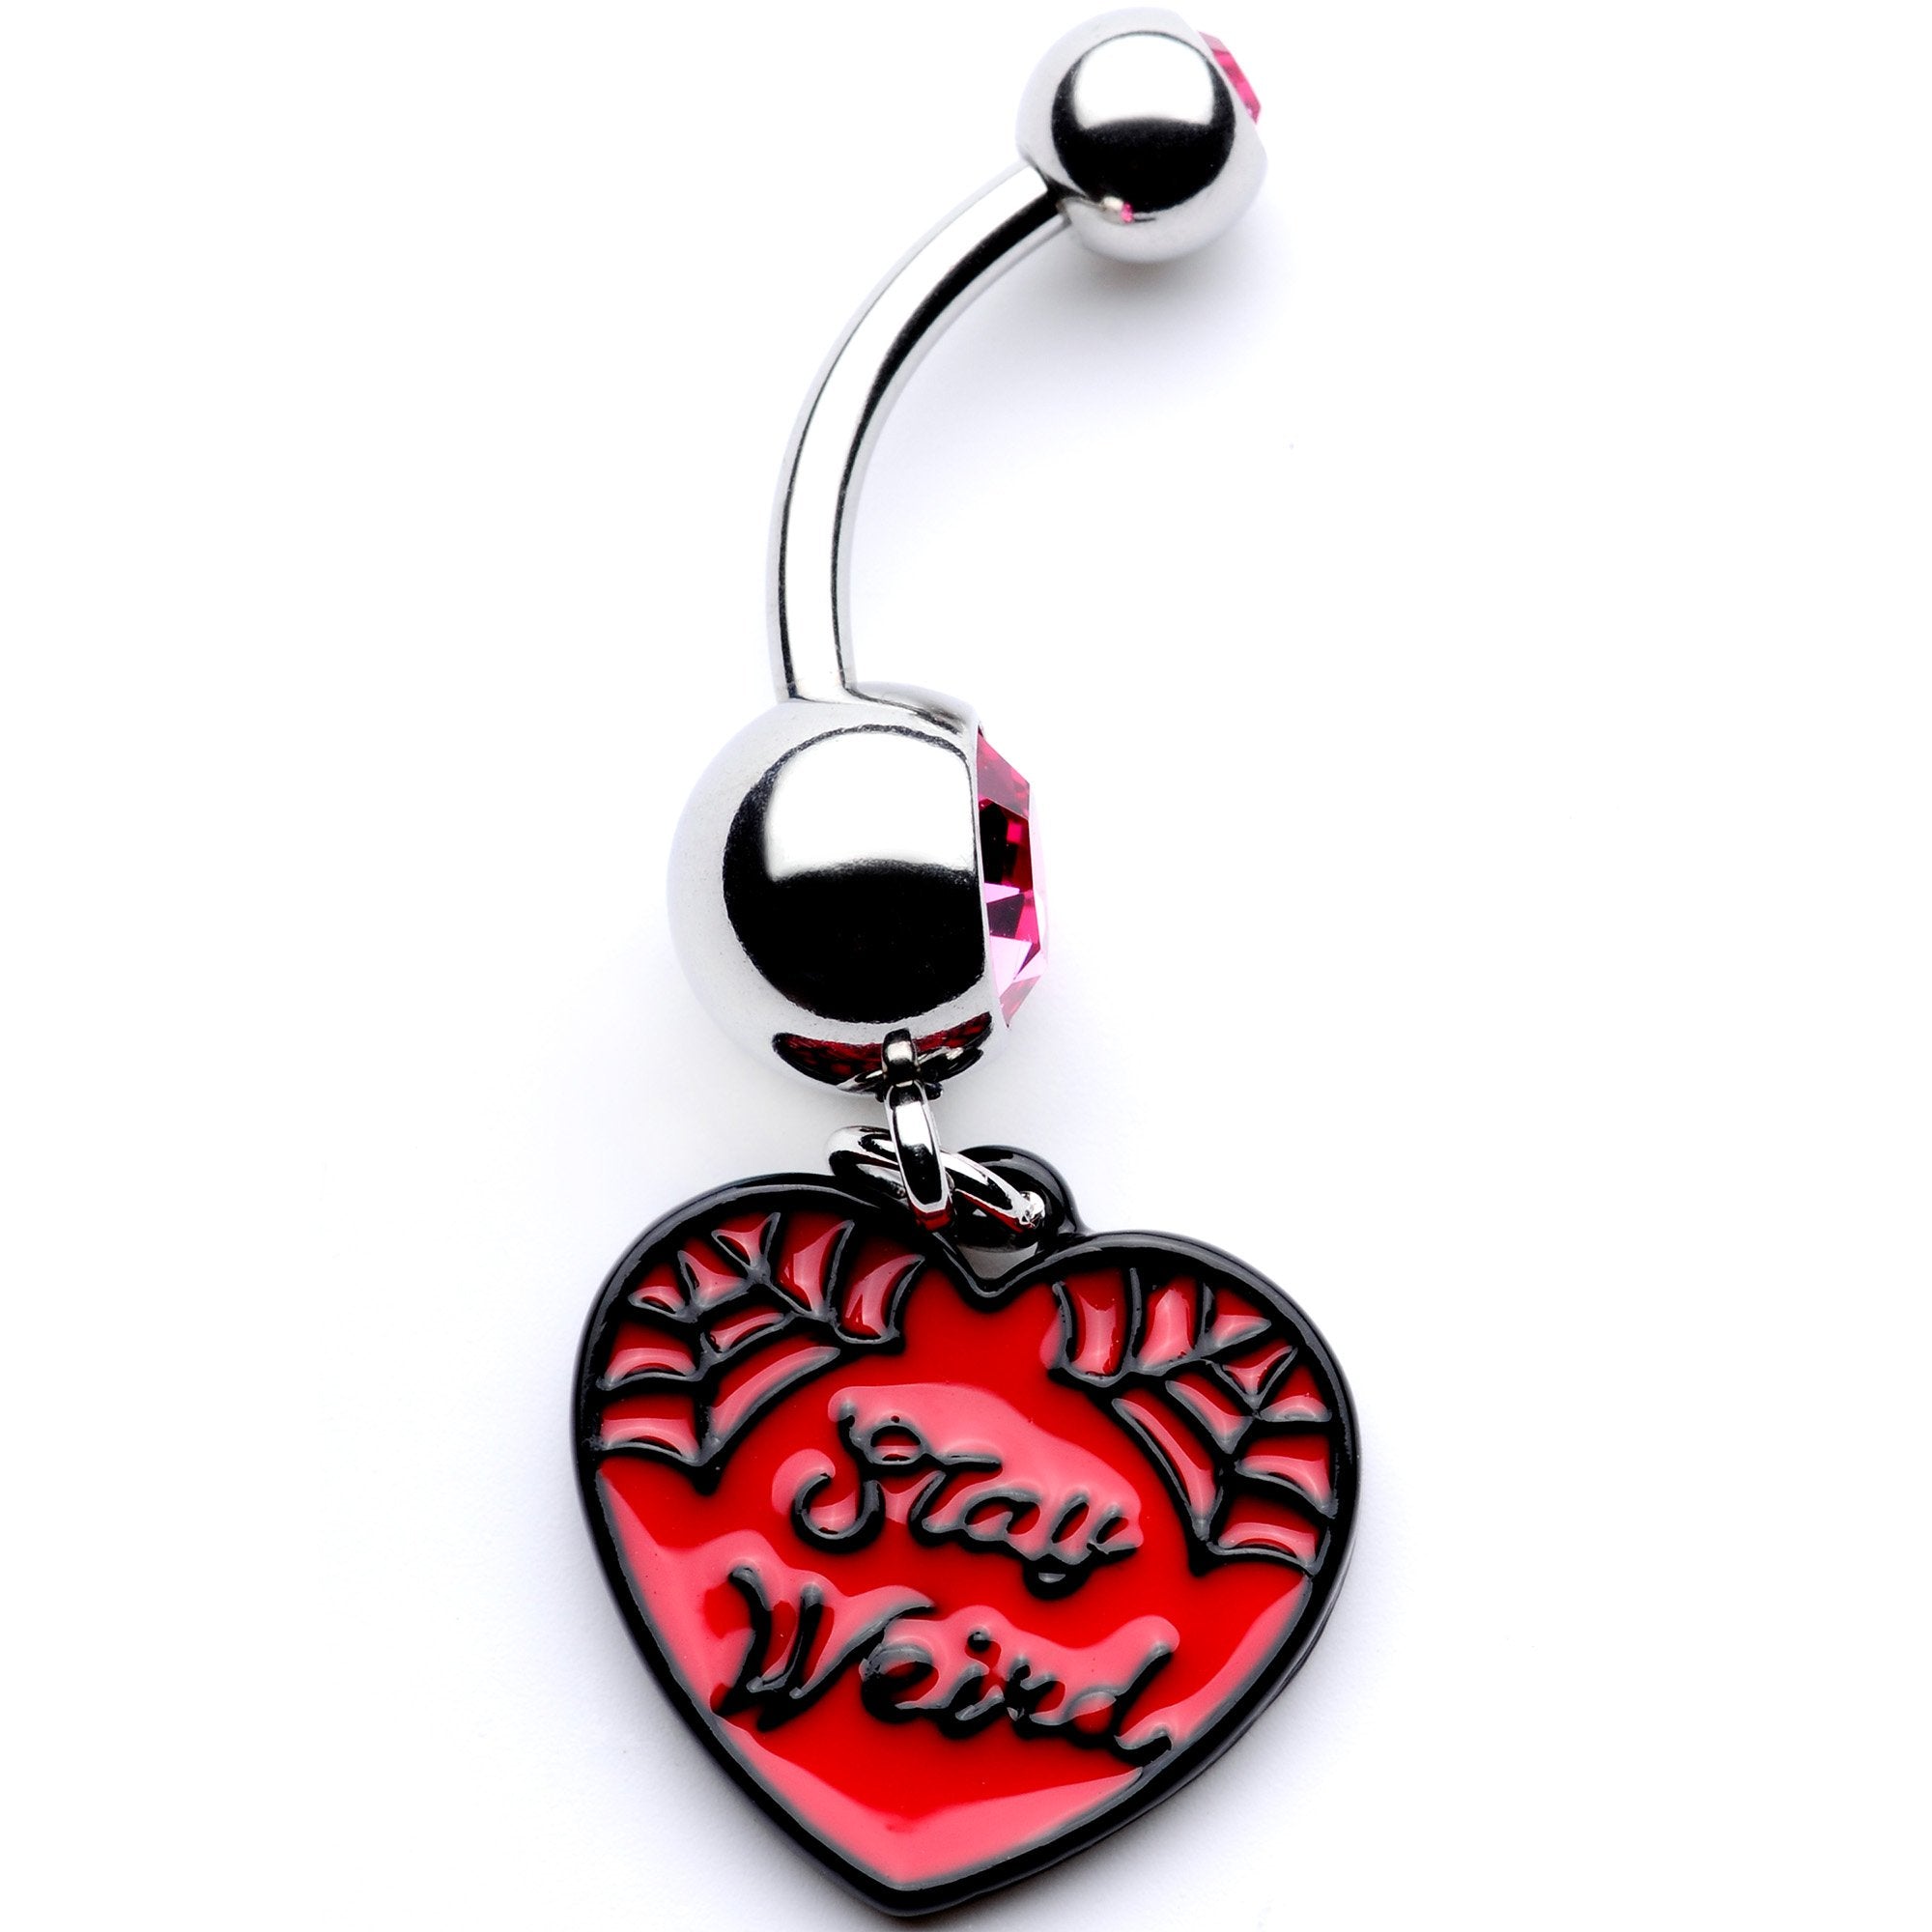 Pink Gem Stay Weird Red Heart Dangle Belly Ring